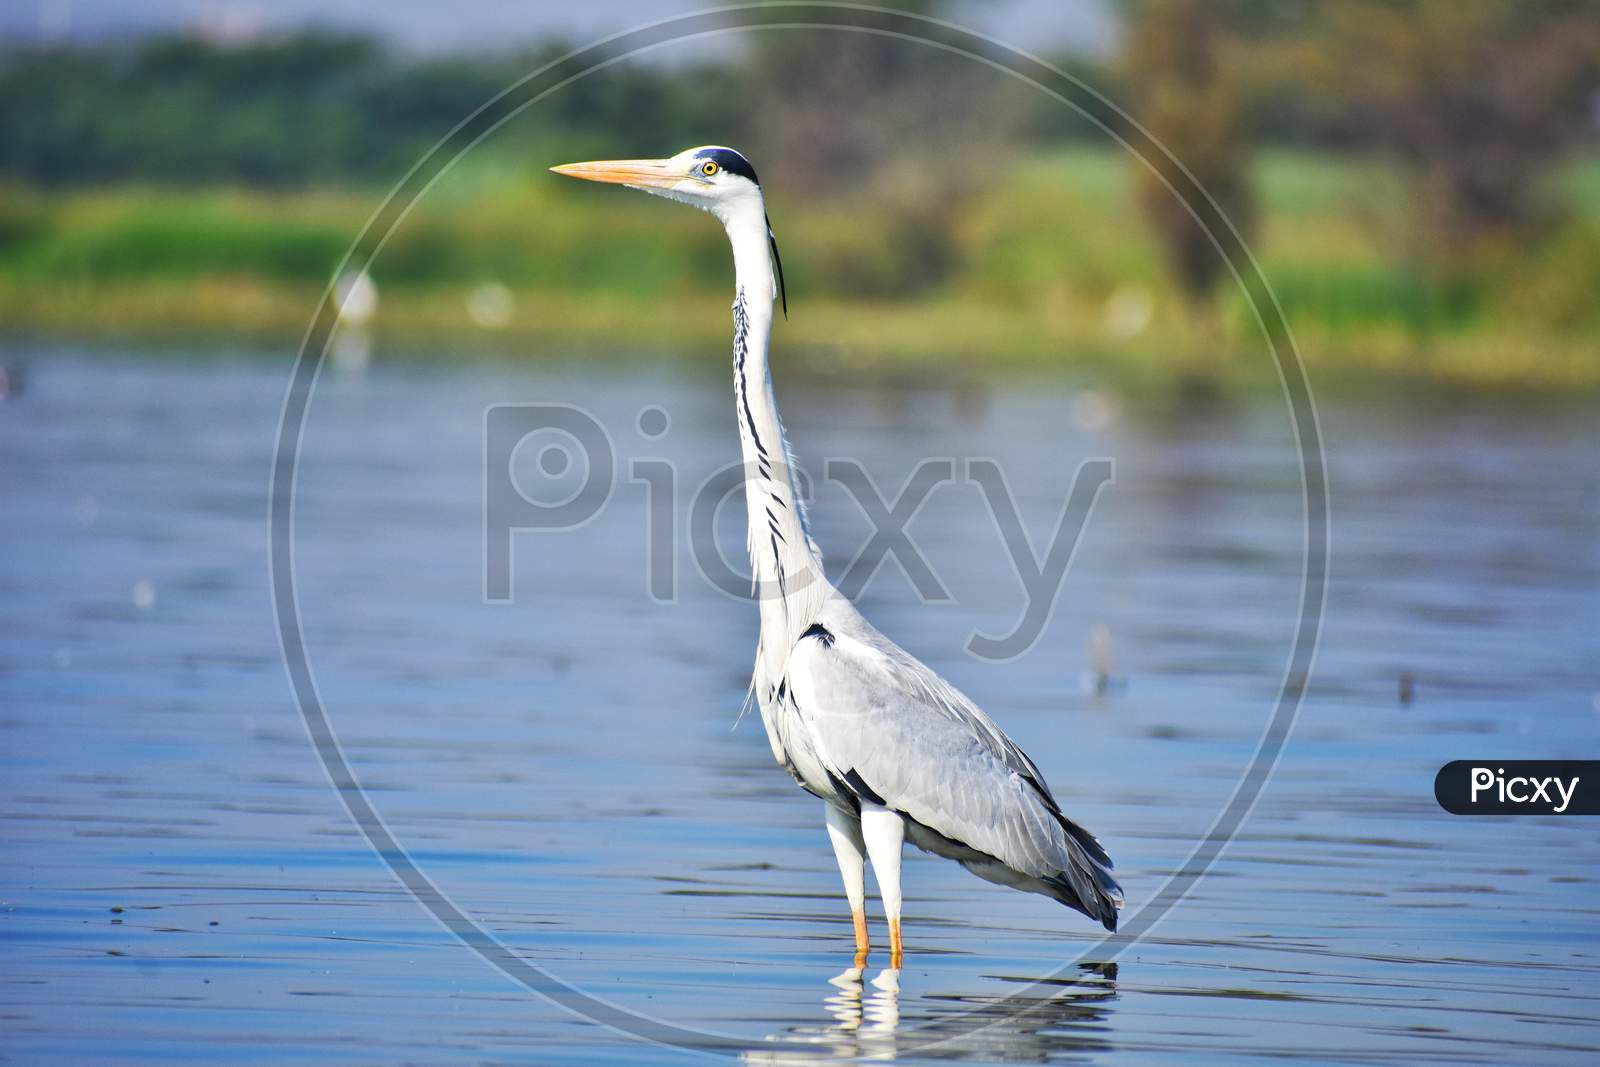 Grey heron standing in lake water with reflection